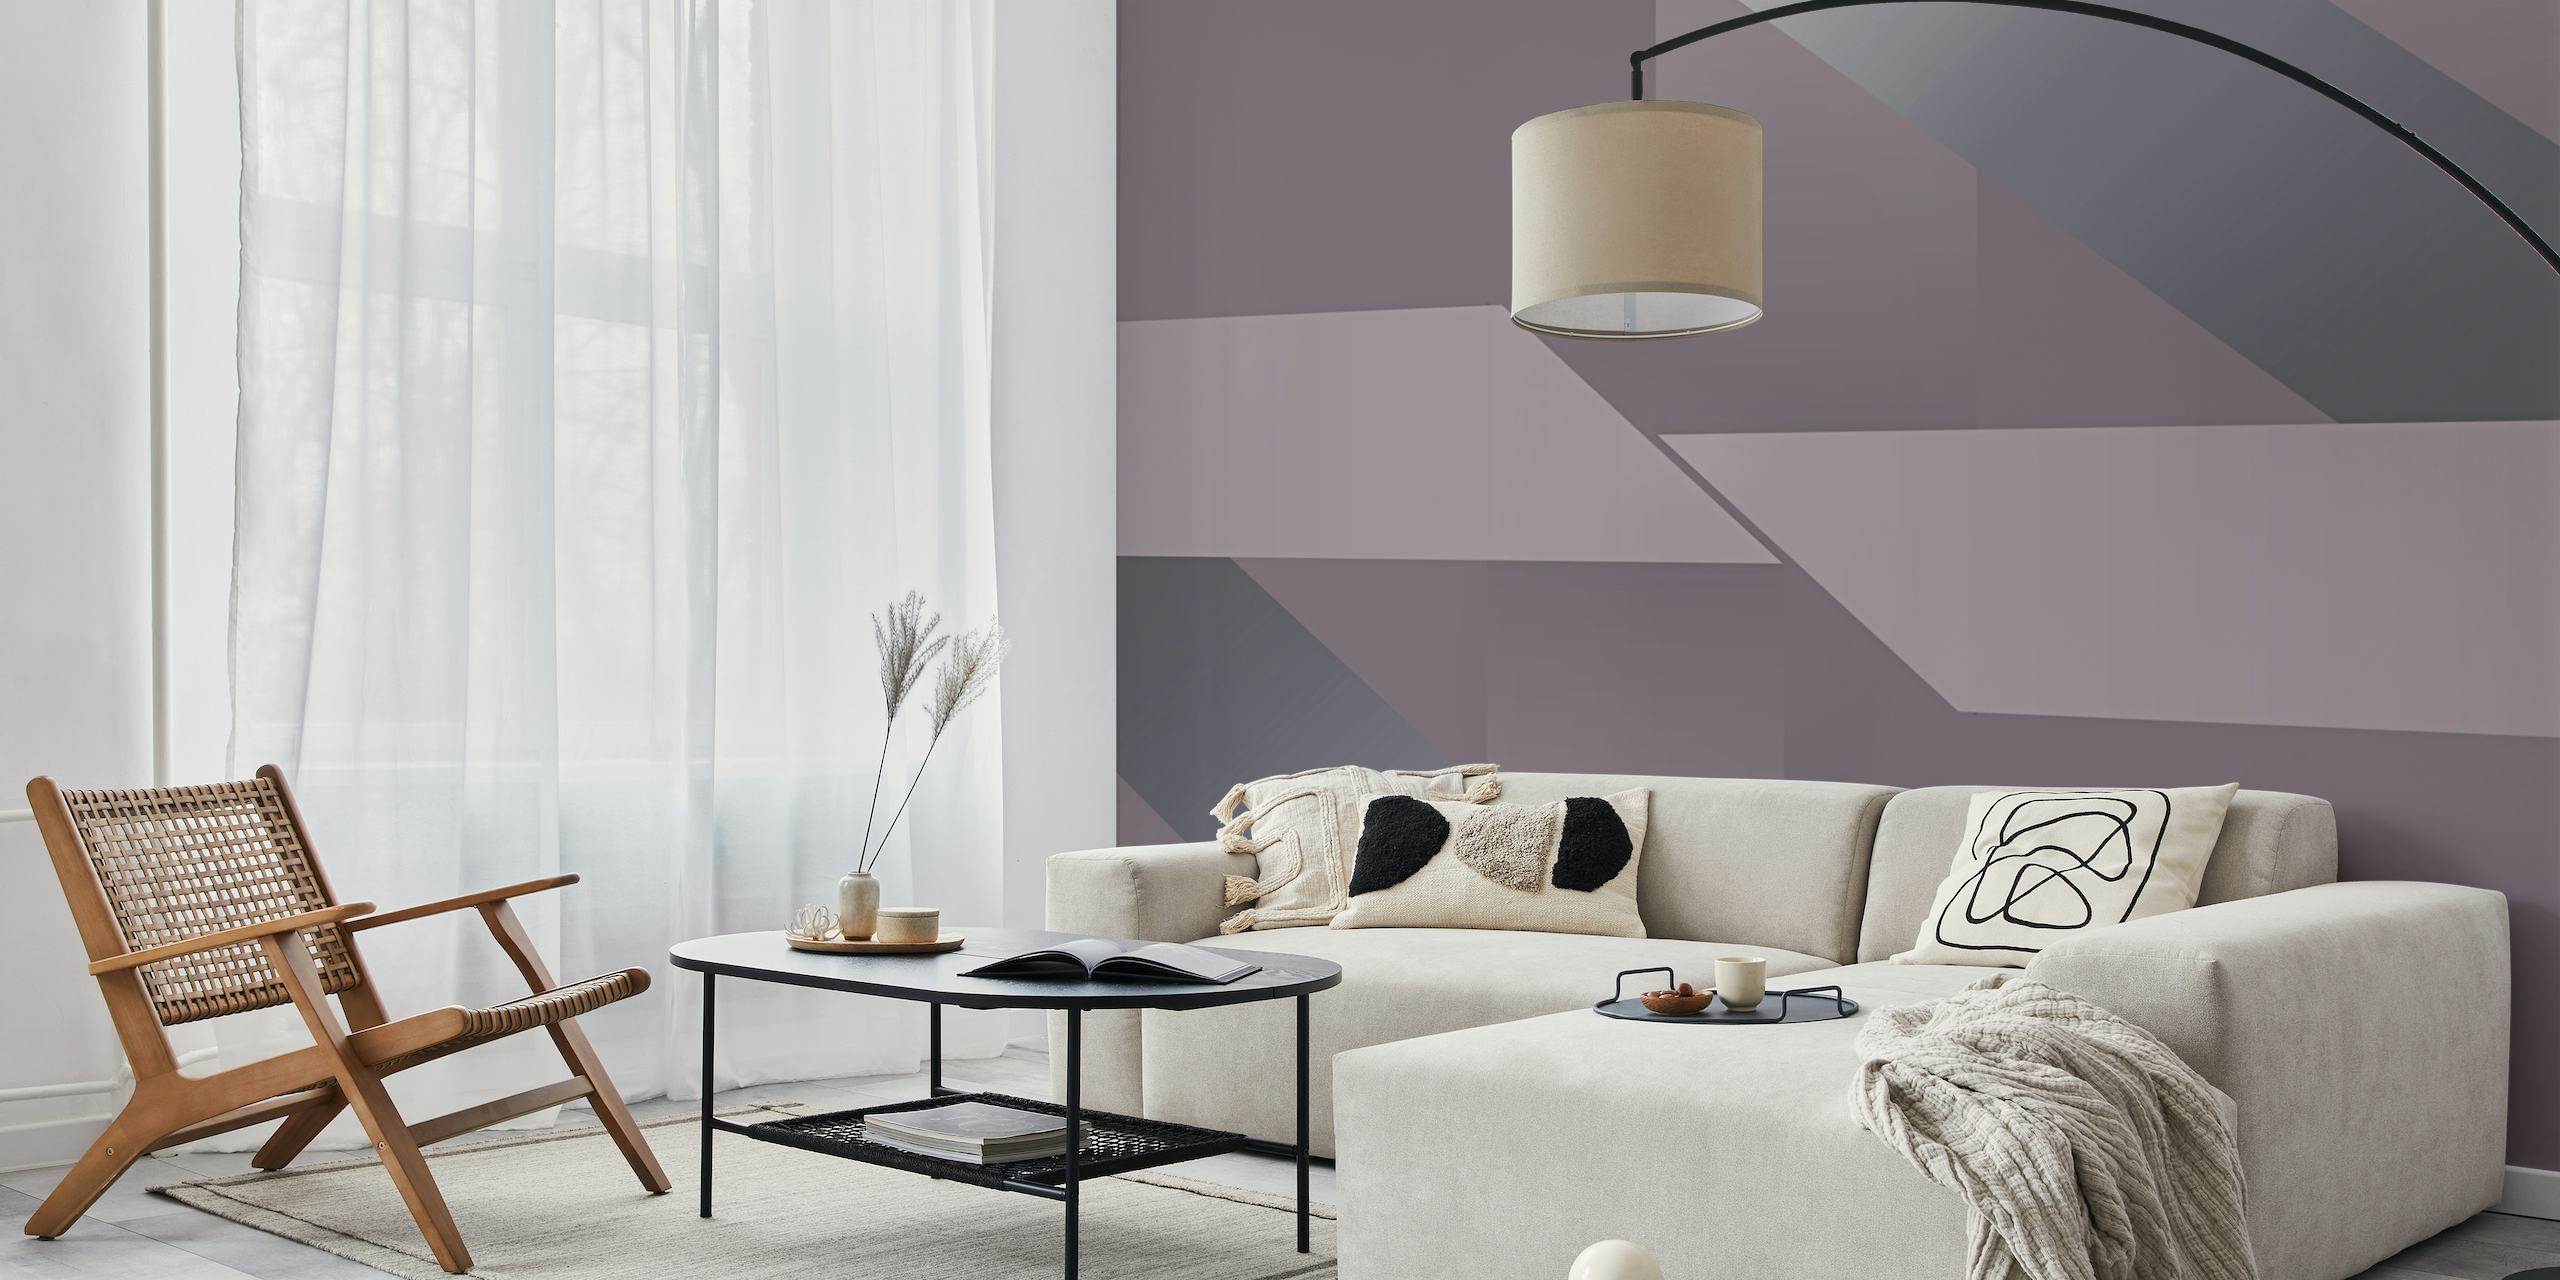 Abstract geometric wall mural in soft hues inspired by Japanese aesthetic